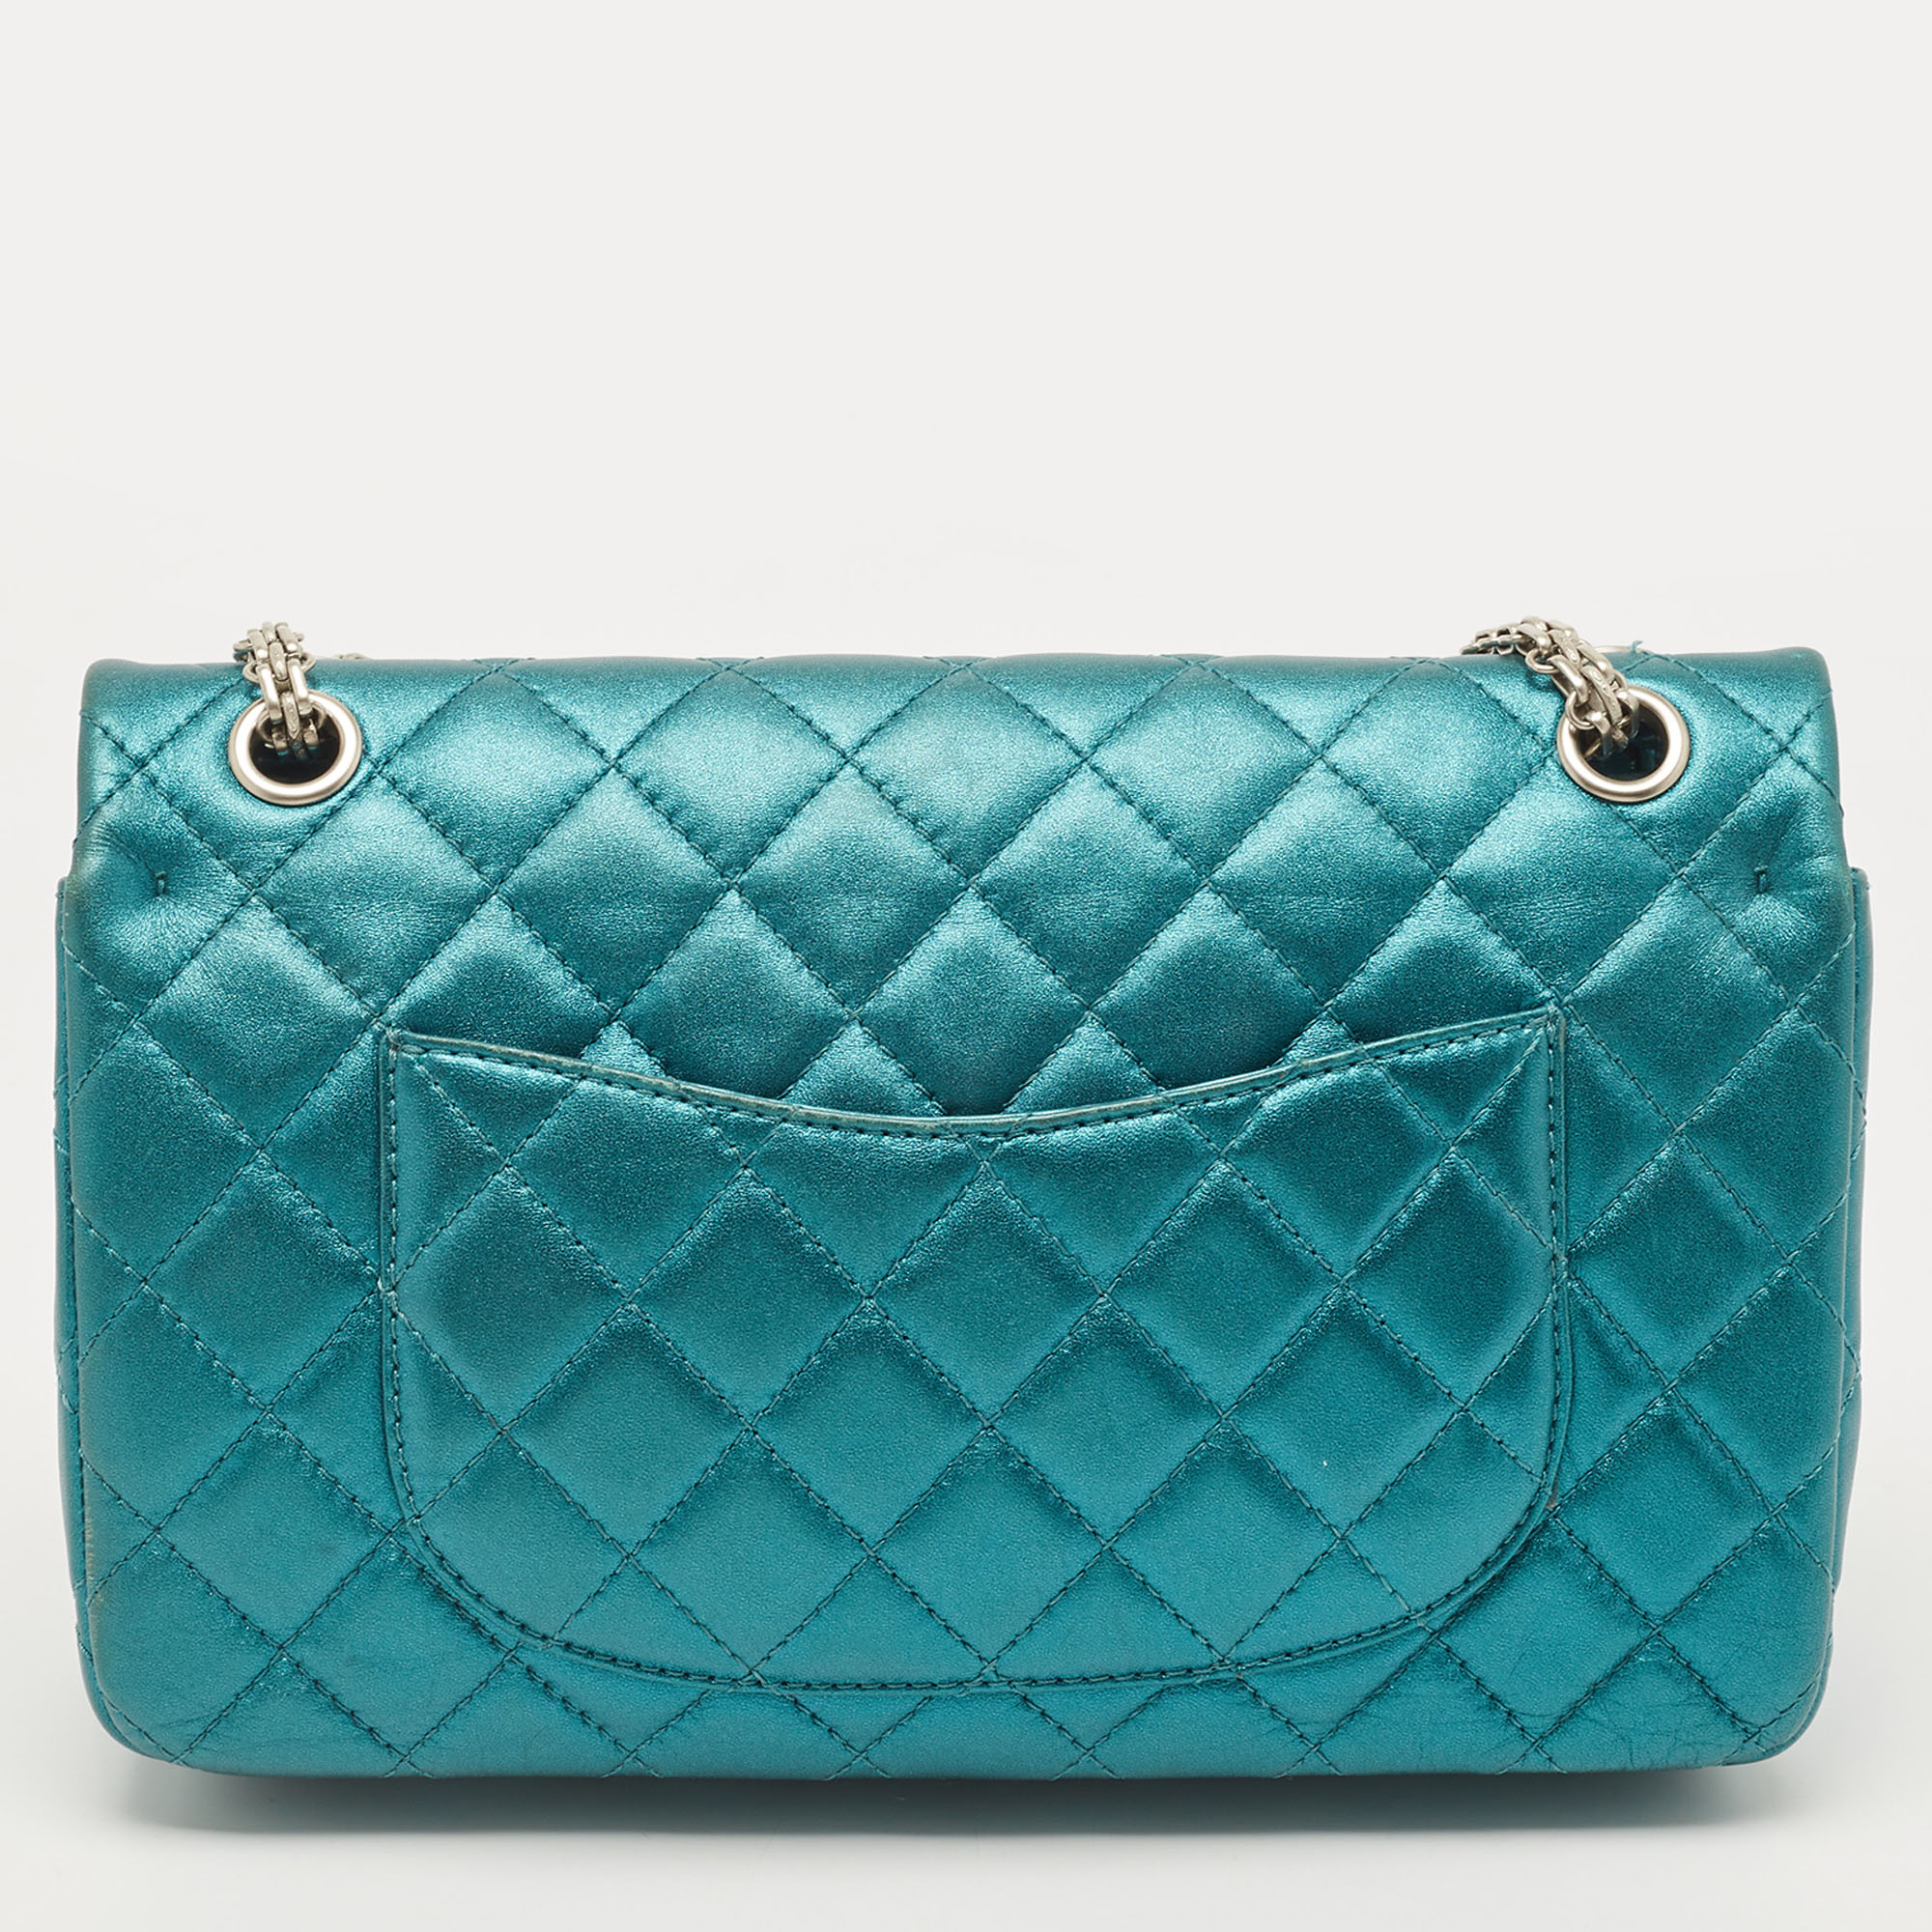 Chanel Metallic Teal Green Quilted Leather Reissue 2.55 Classic 226 Flap Bag